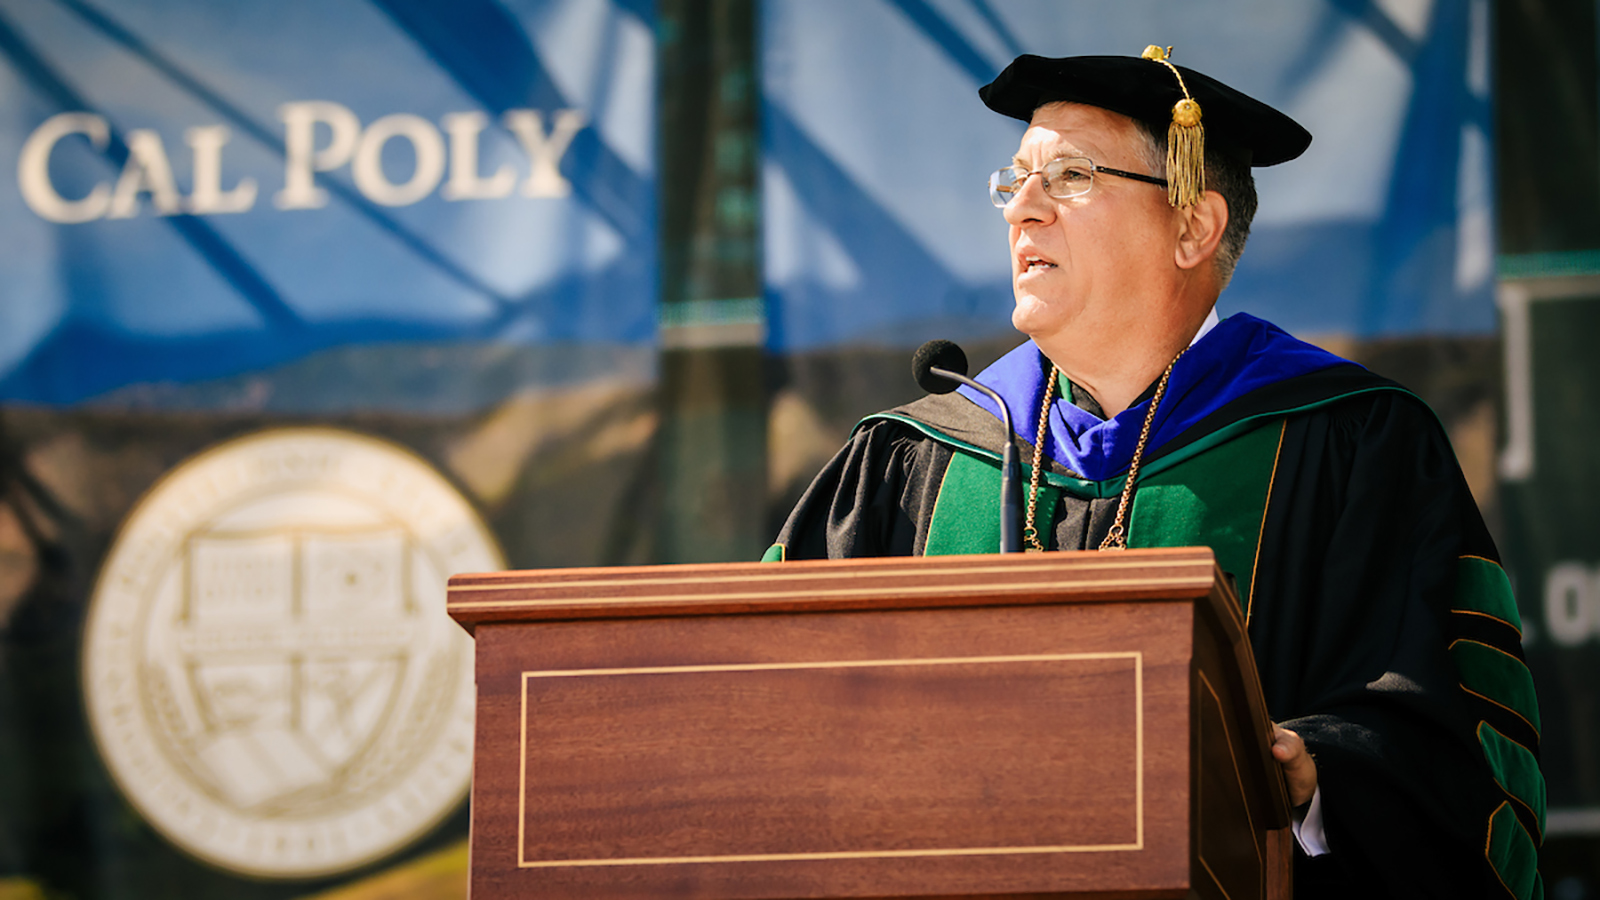 President Armstrong, in graduation regalia, stands at a podium with the sun shining on a Cal Poly banner behind him.